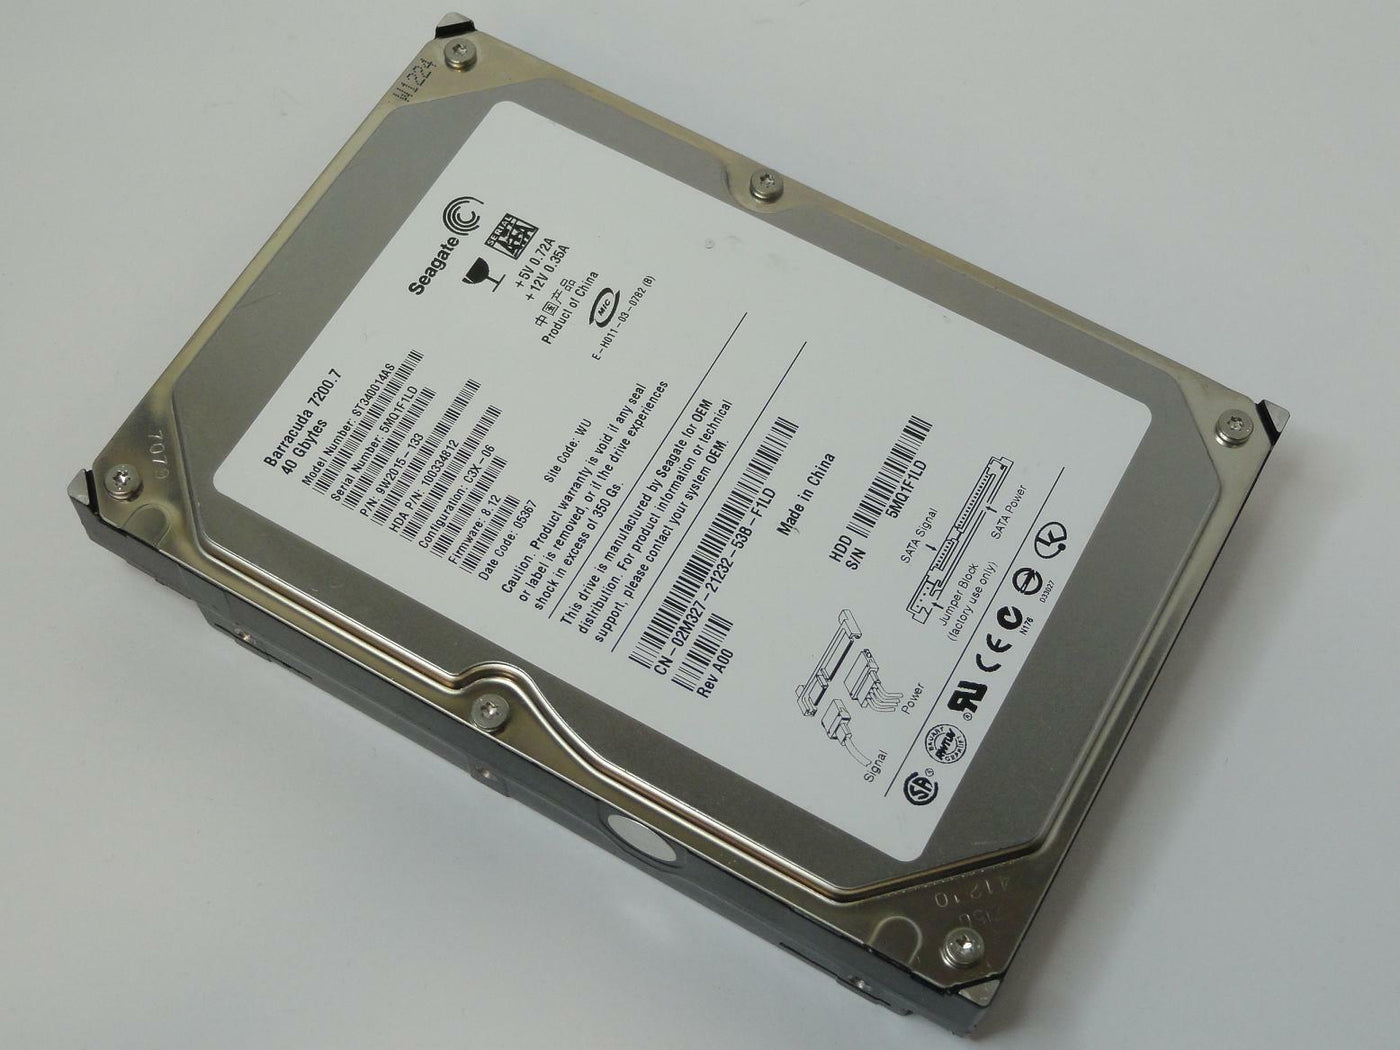 Seagate Dell 40GB 7200rpm 3.5in HDD ( ST340014AS 9W2015-133 02M327 ) USED